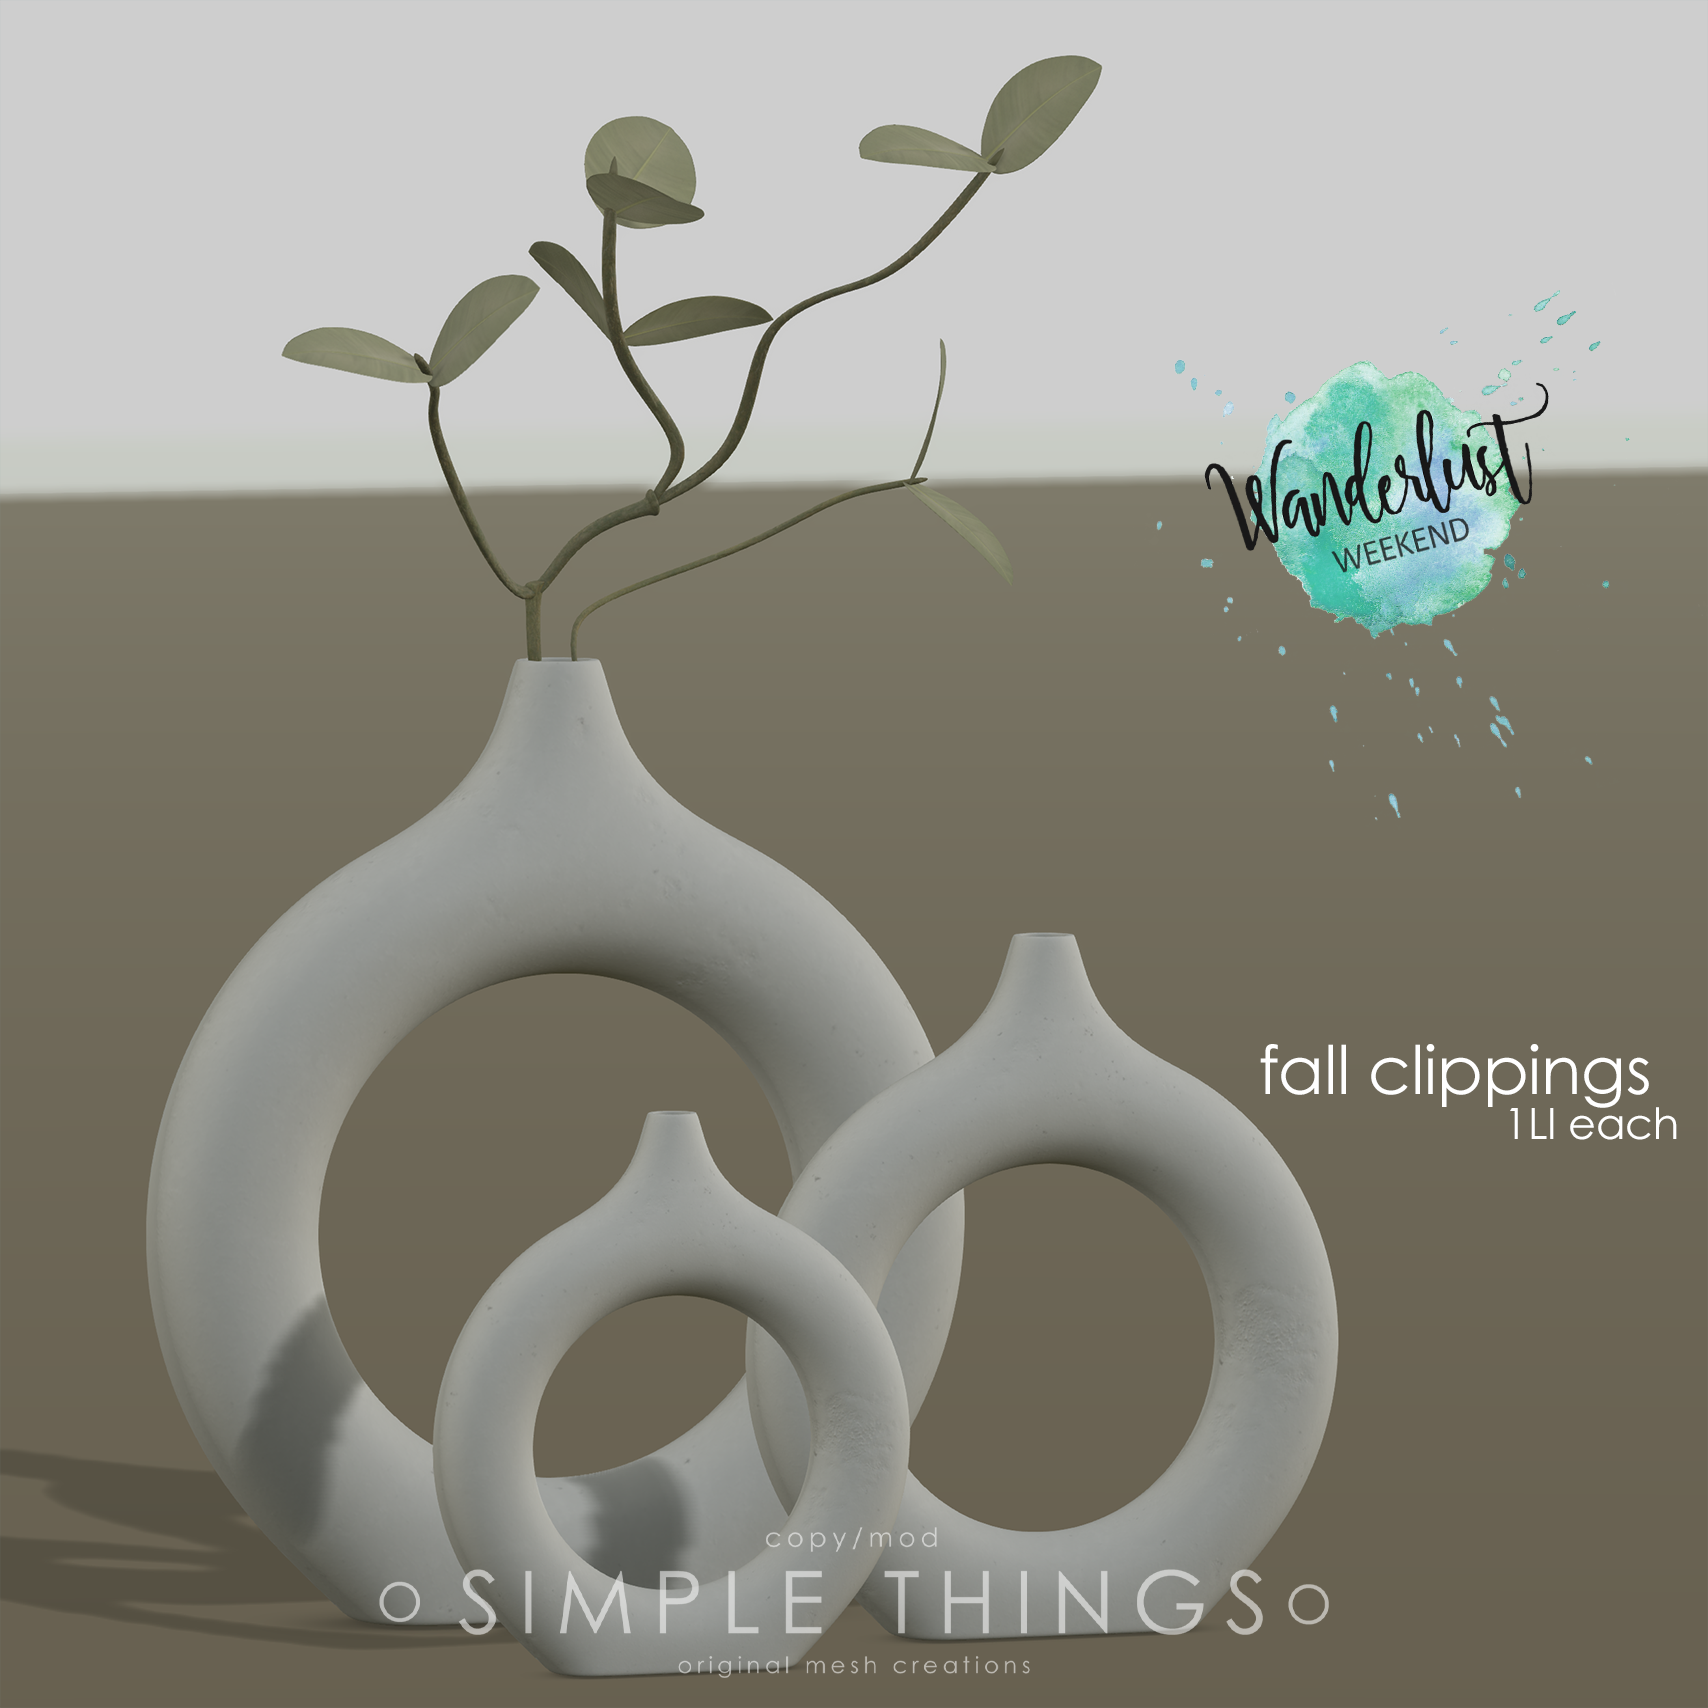 Simple Things – Fall Clippings